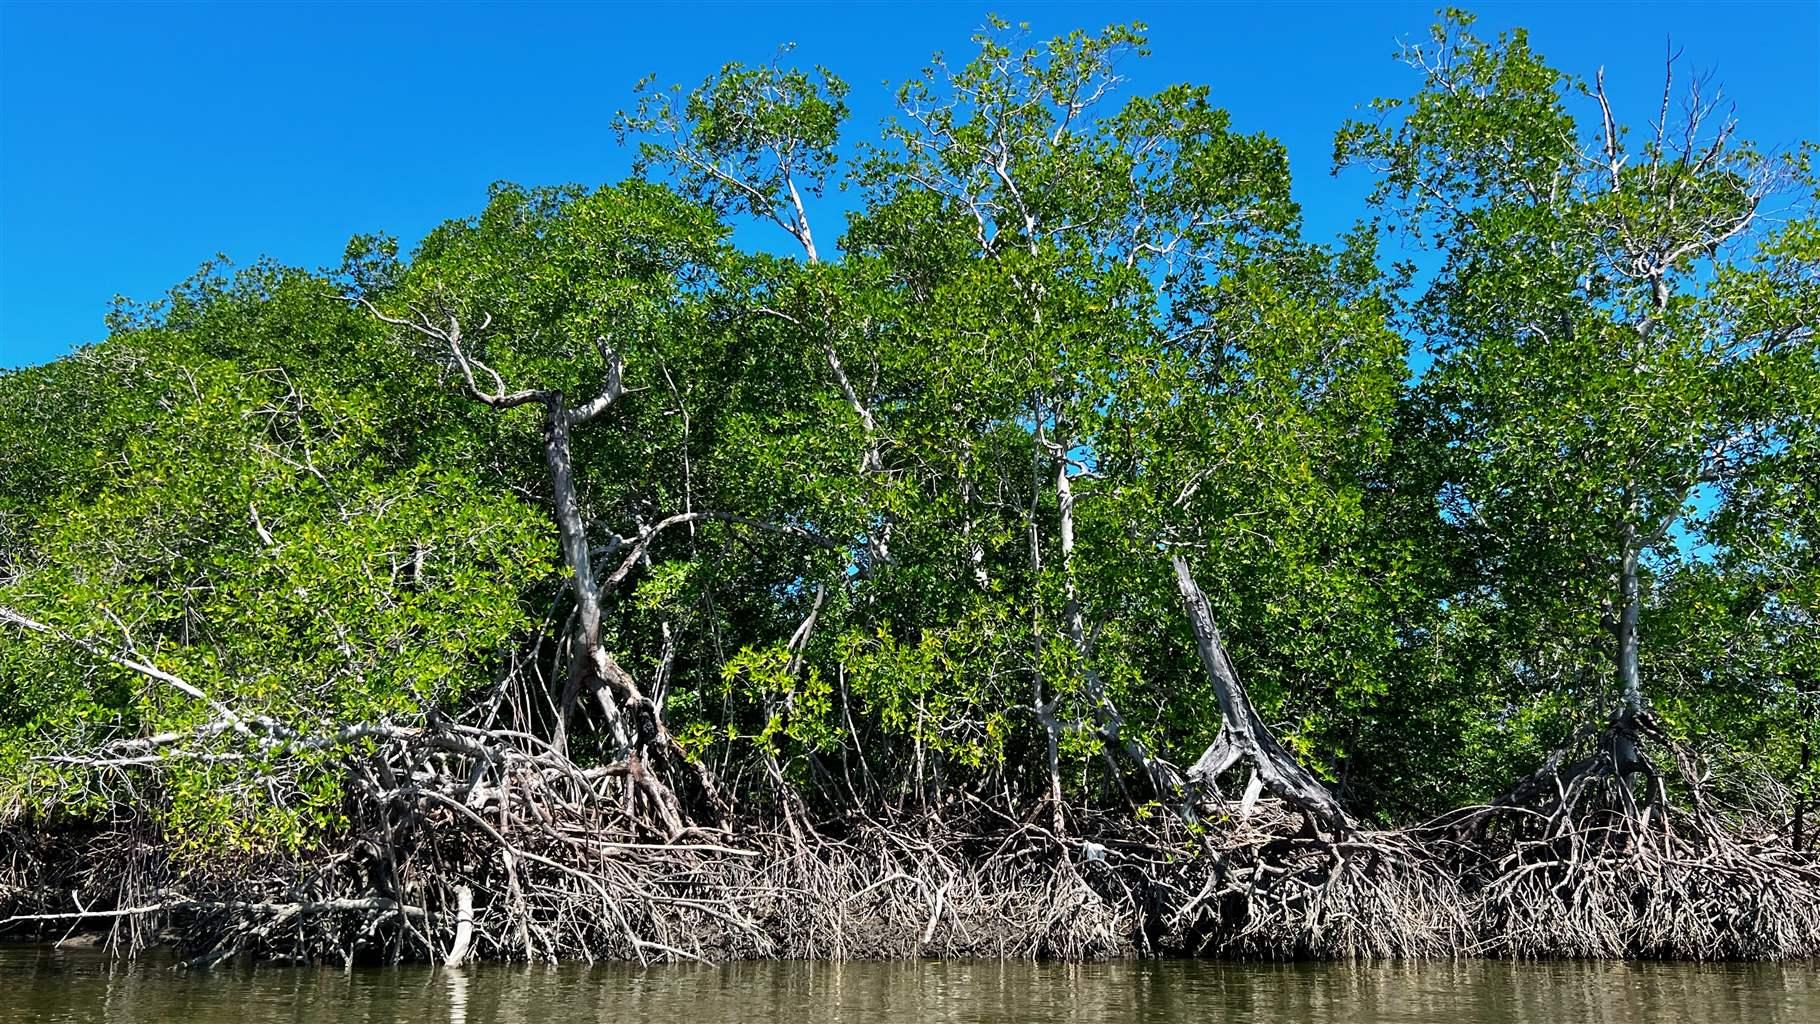 The above-ground roots of a cluster of mangroves prominently reach out of the water and are reflected on the water’s surface.